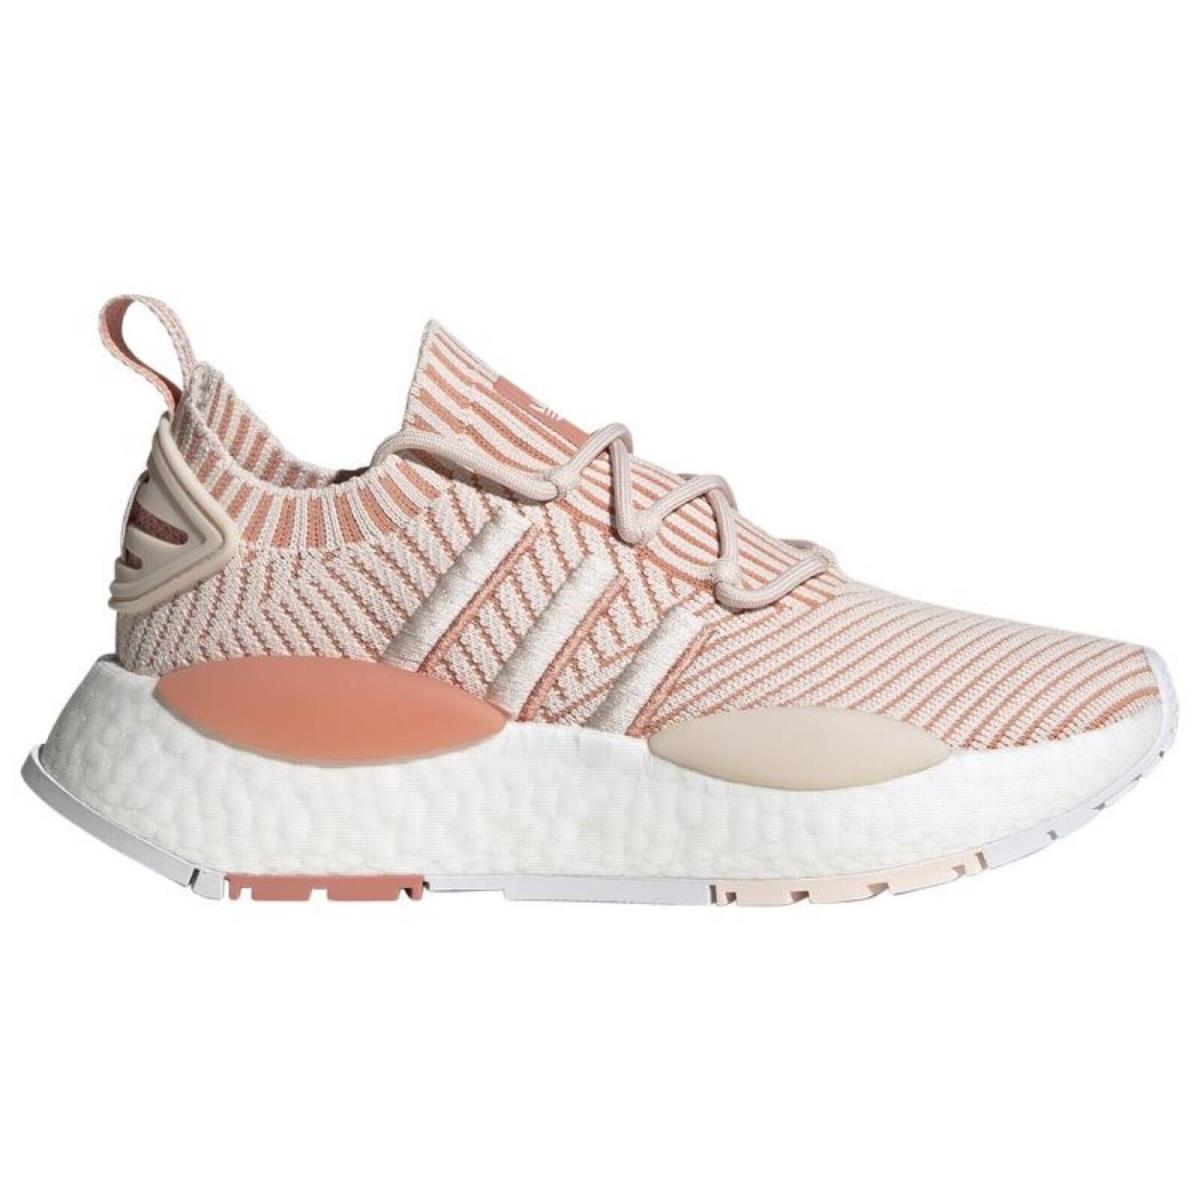 Adidas Originals Nmd W1 Women s Sneakers Casual Shoes Sport Running Pink - Pink, Manufacturer: Pink/White